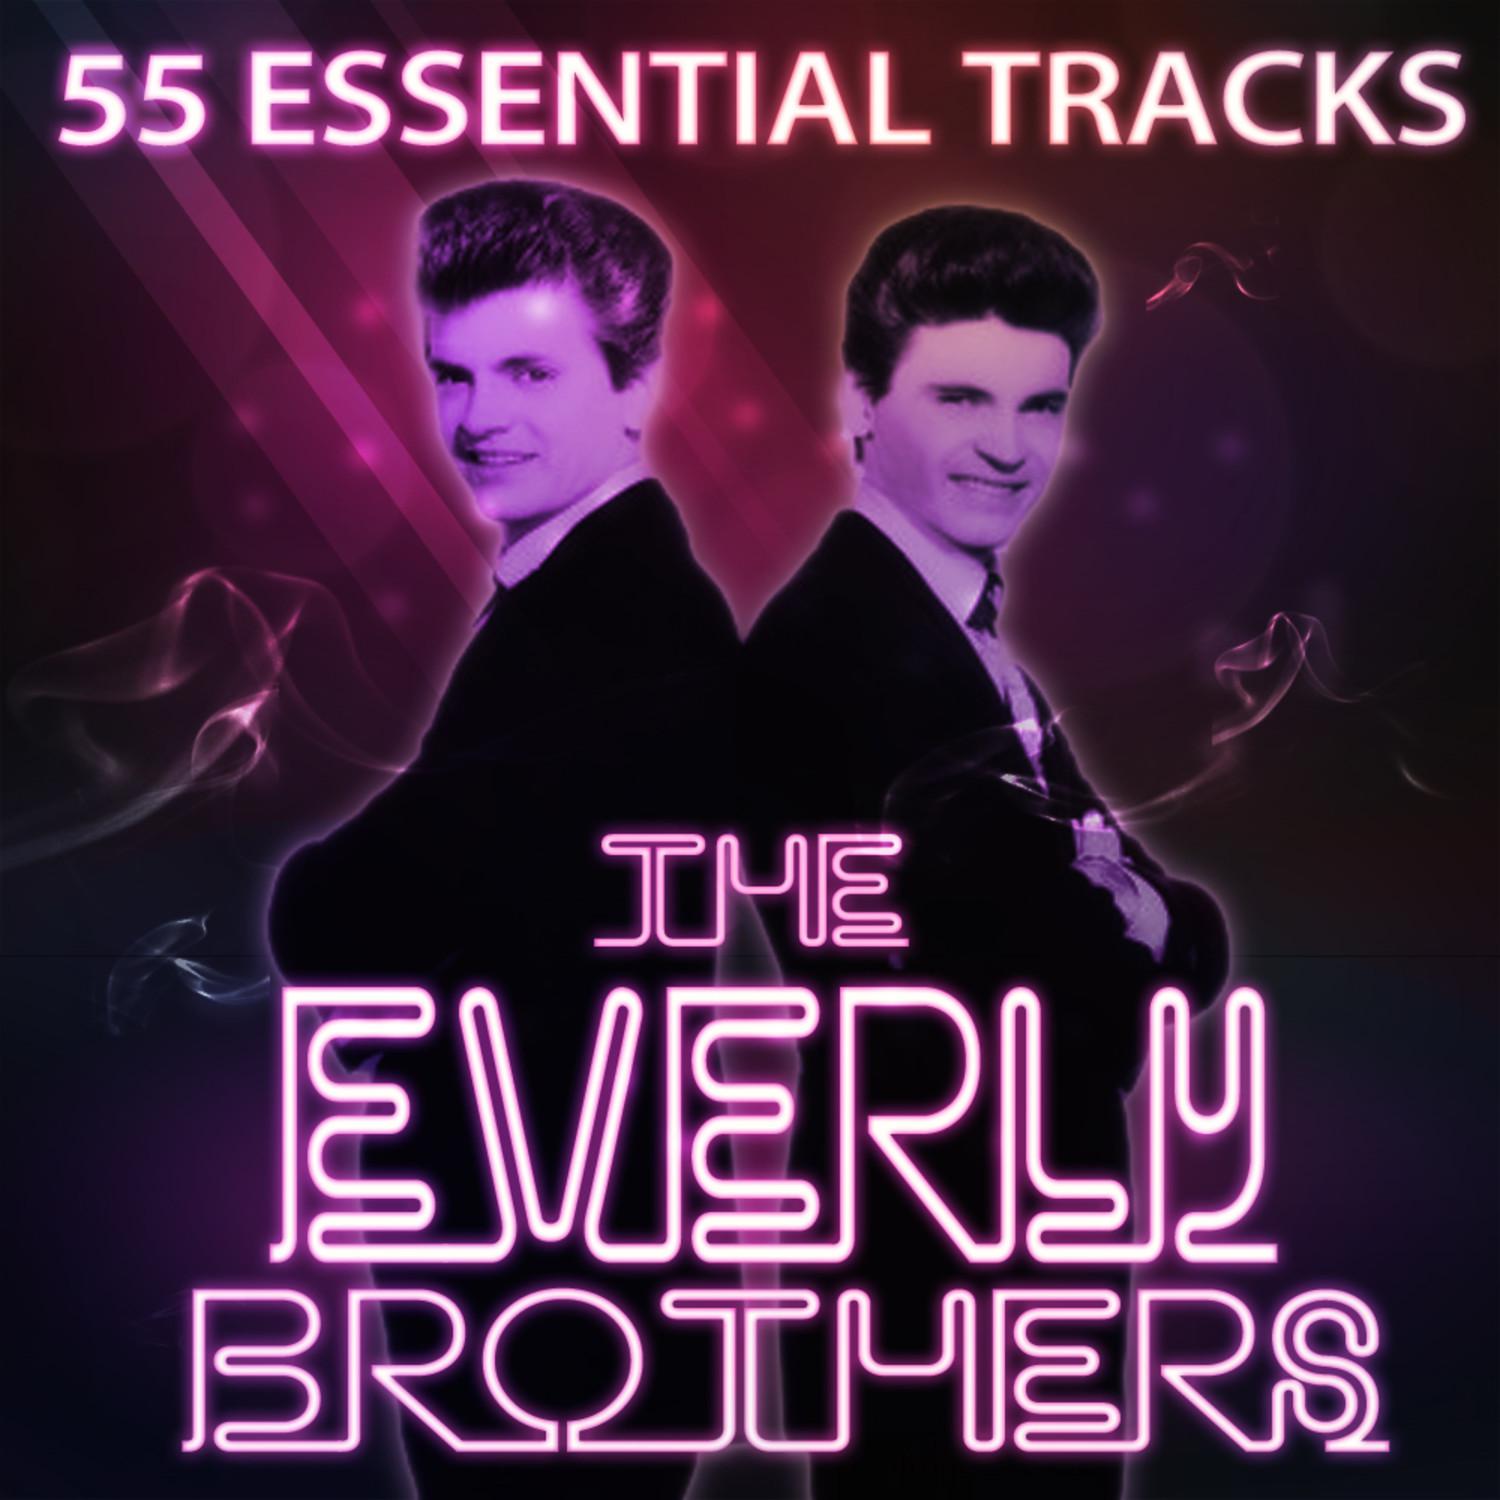 The Everly Brothers 55 Essential Tracks (Digitally Remastered)